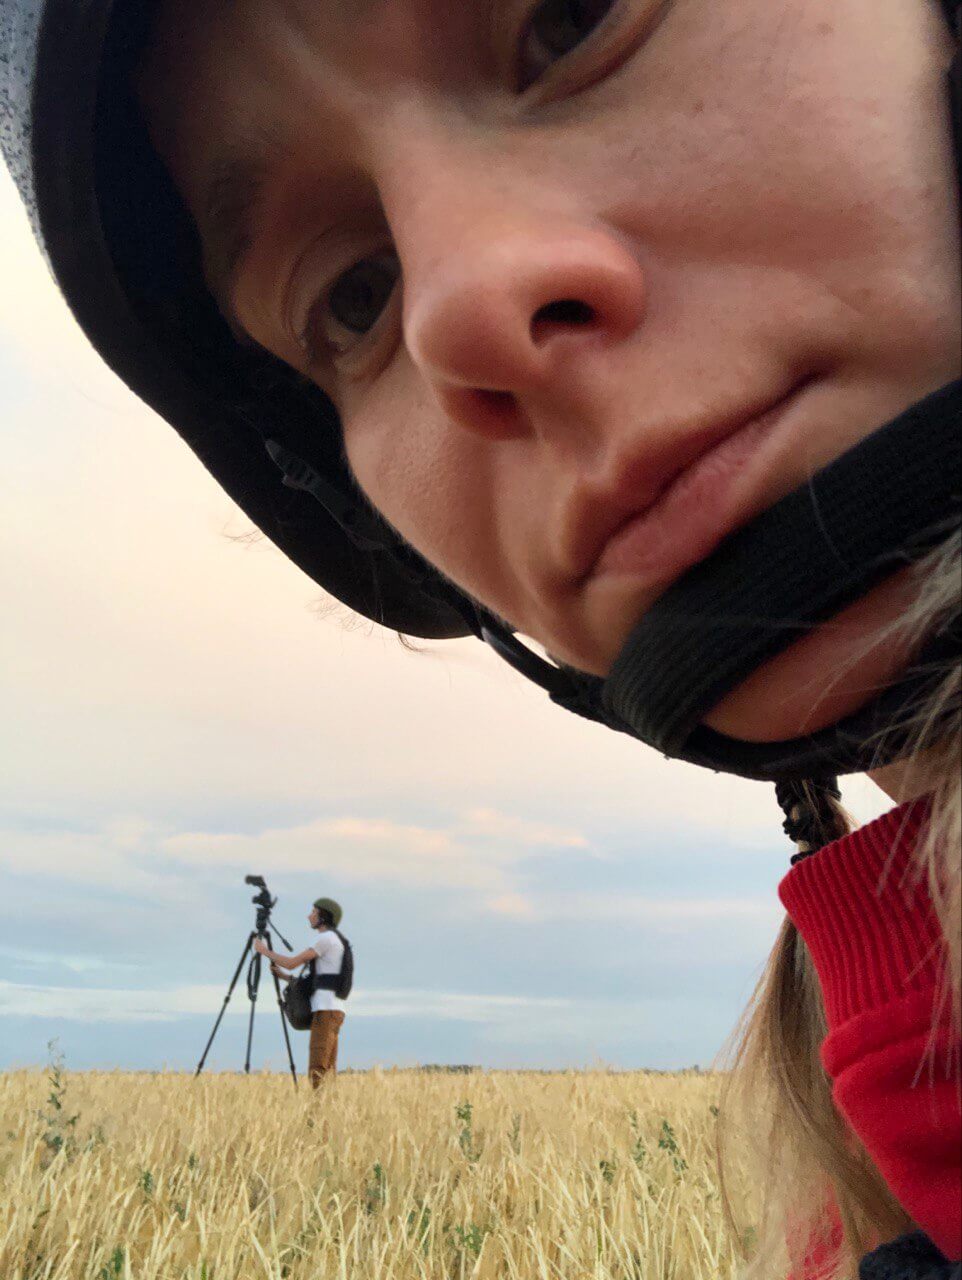 Production still of Displaced. Olha Zhurba, director of Displaced, is taking a photo of herself and is shown in a close-up. In the background is Volodymyr Usik, Director of Photography, who stands in profile and looks up at a camera. They are close to the frontline, and are both wearing flat jackets and helmets.